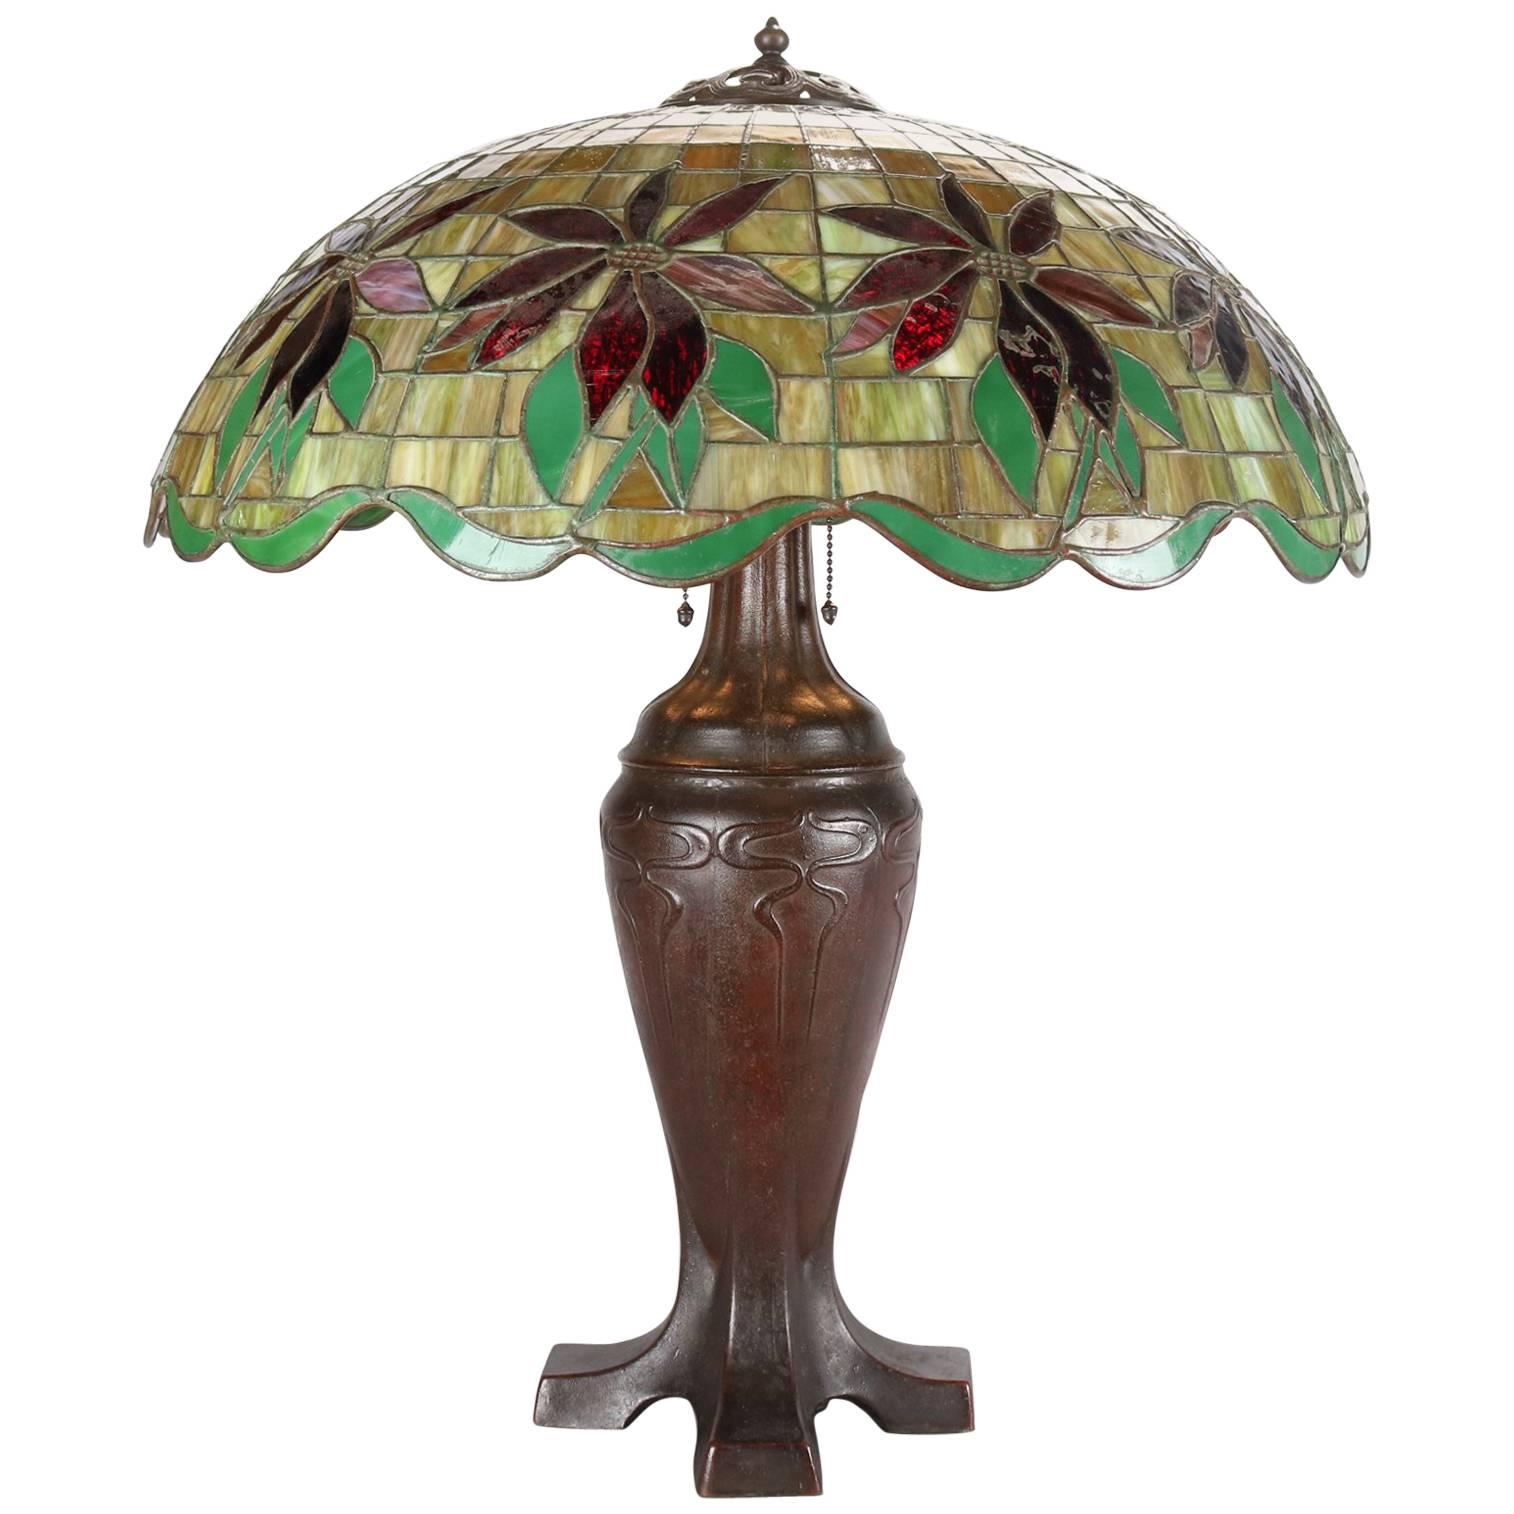 Antique Handel Mosaic Leaded Stained Glass Table Lamp, Poinsettia Design